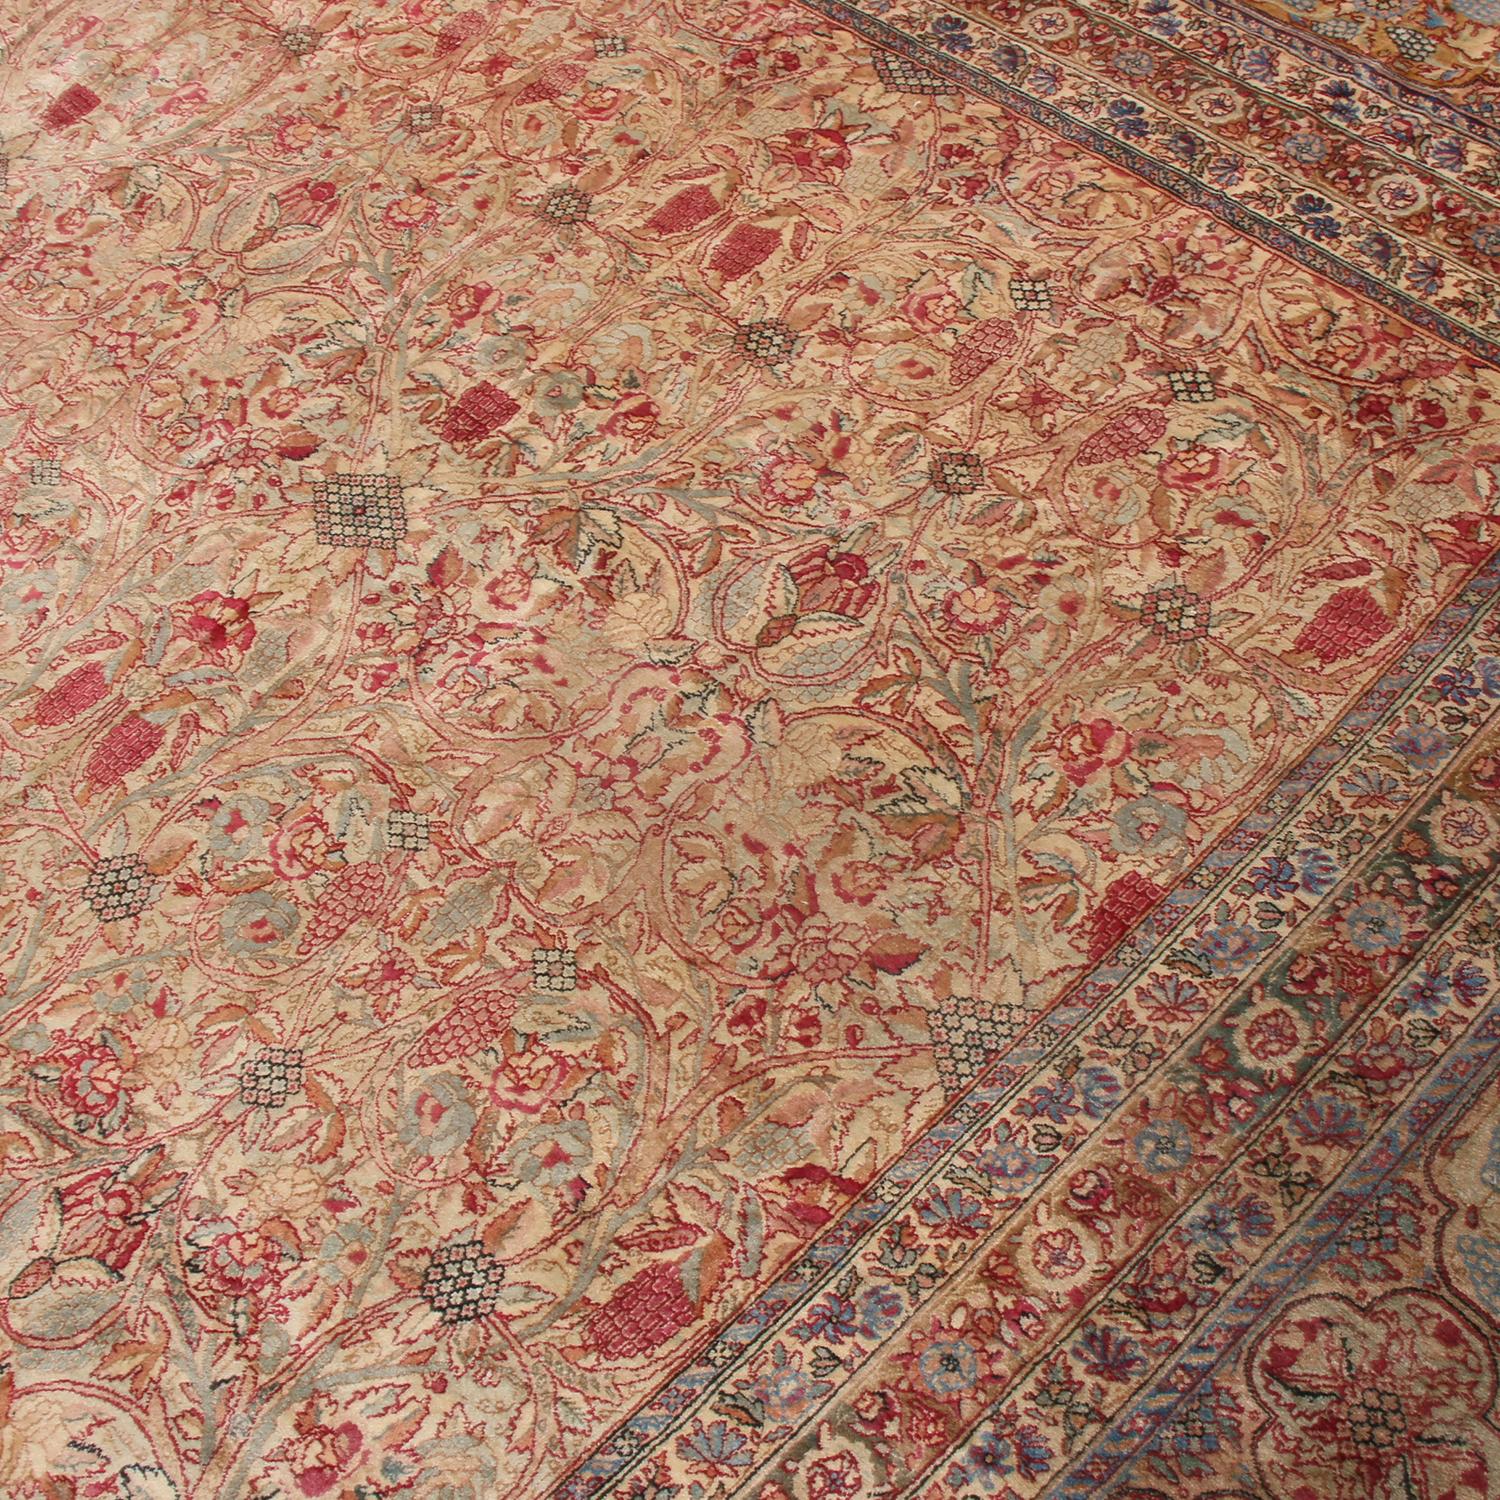 Hand-Knotted Antique Kerman Beige-Brown and Red Wool Persian Rug